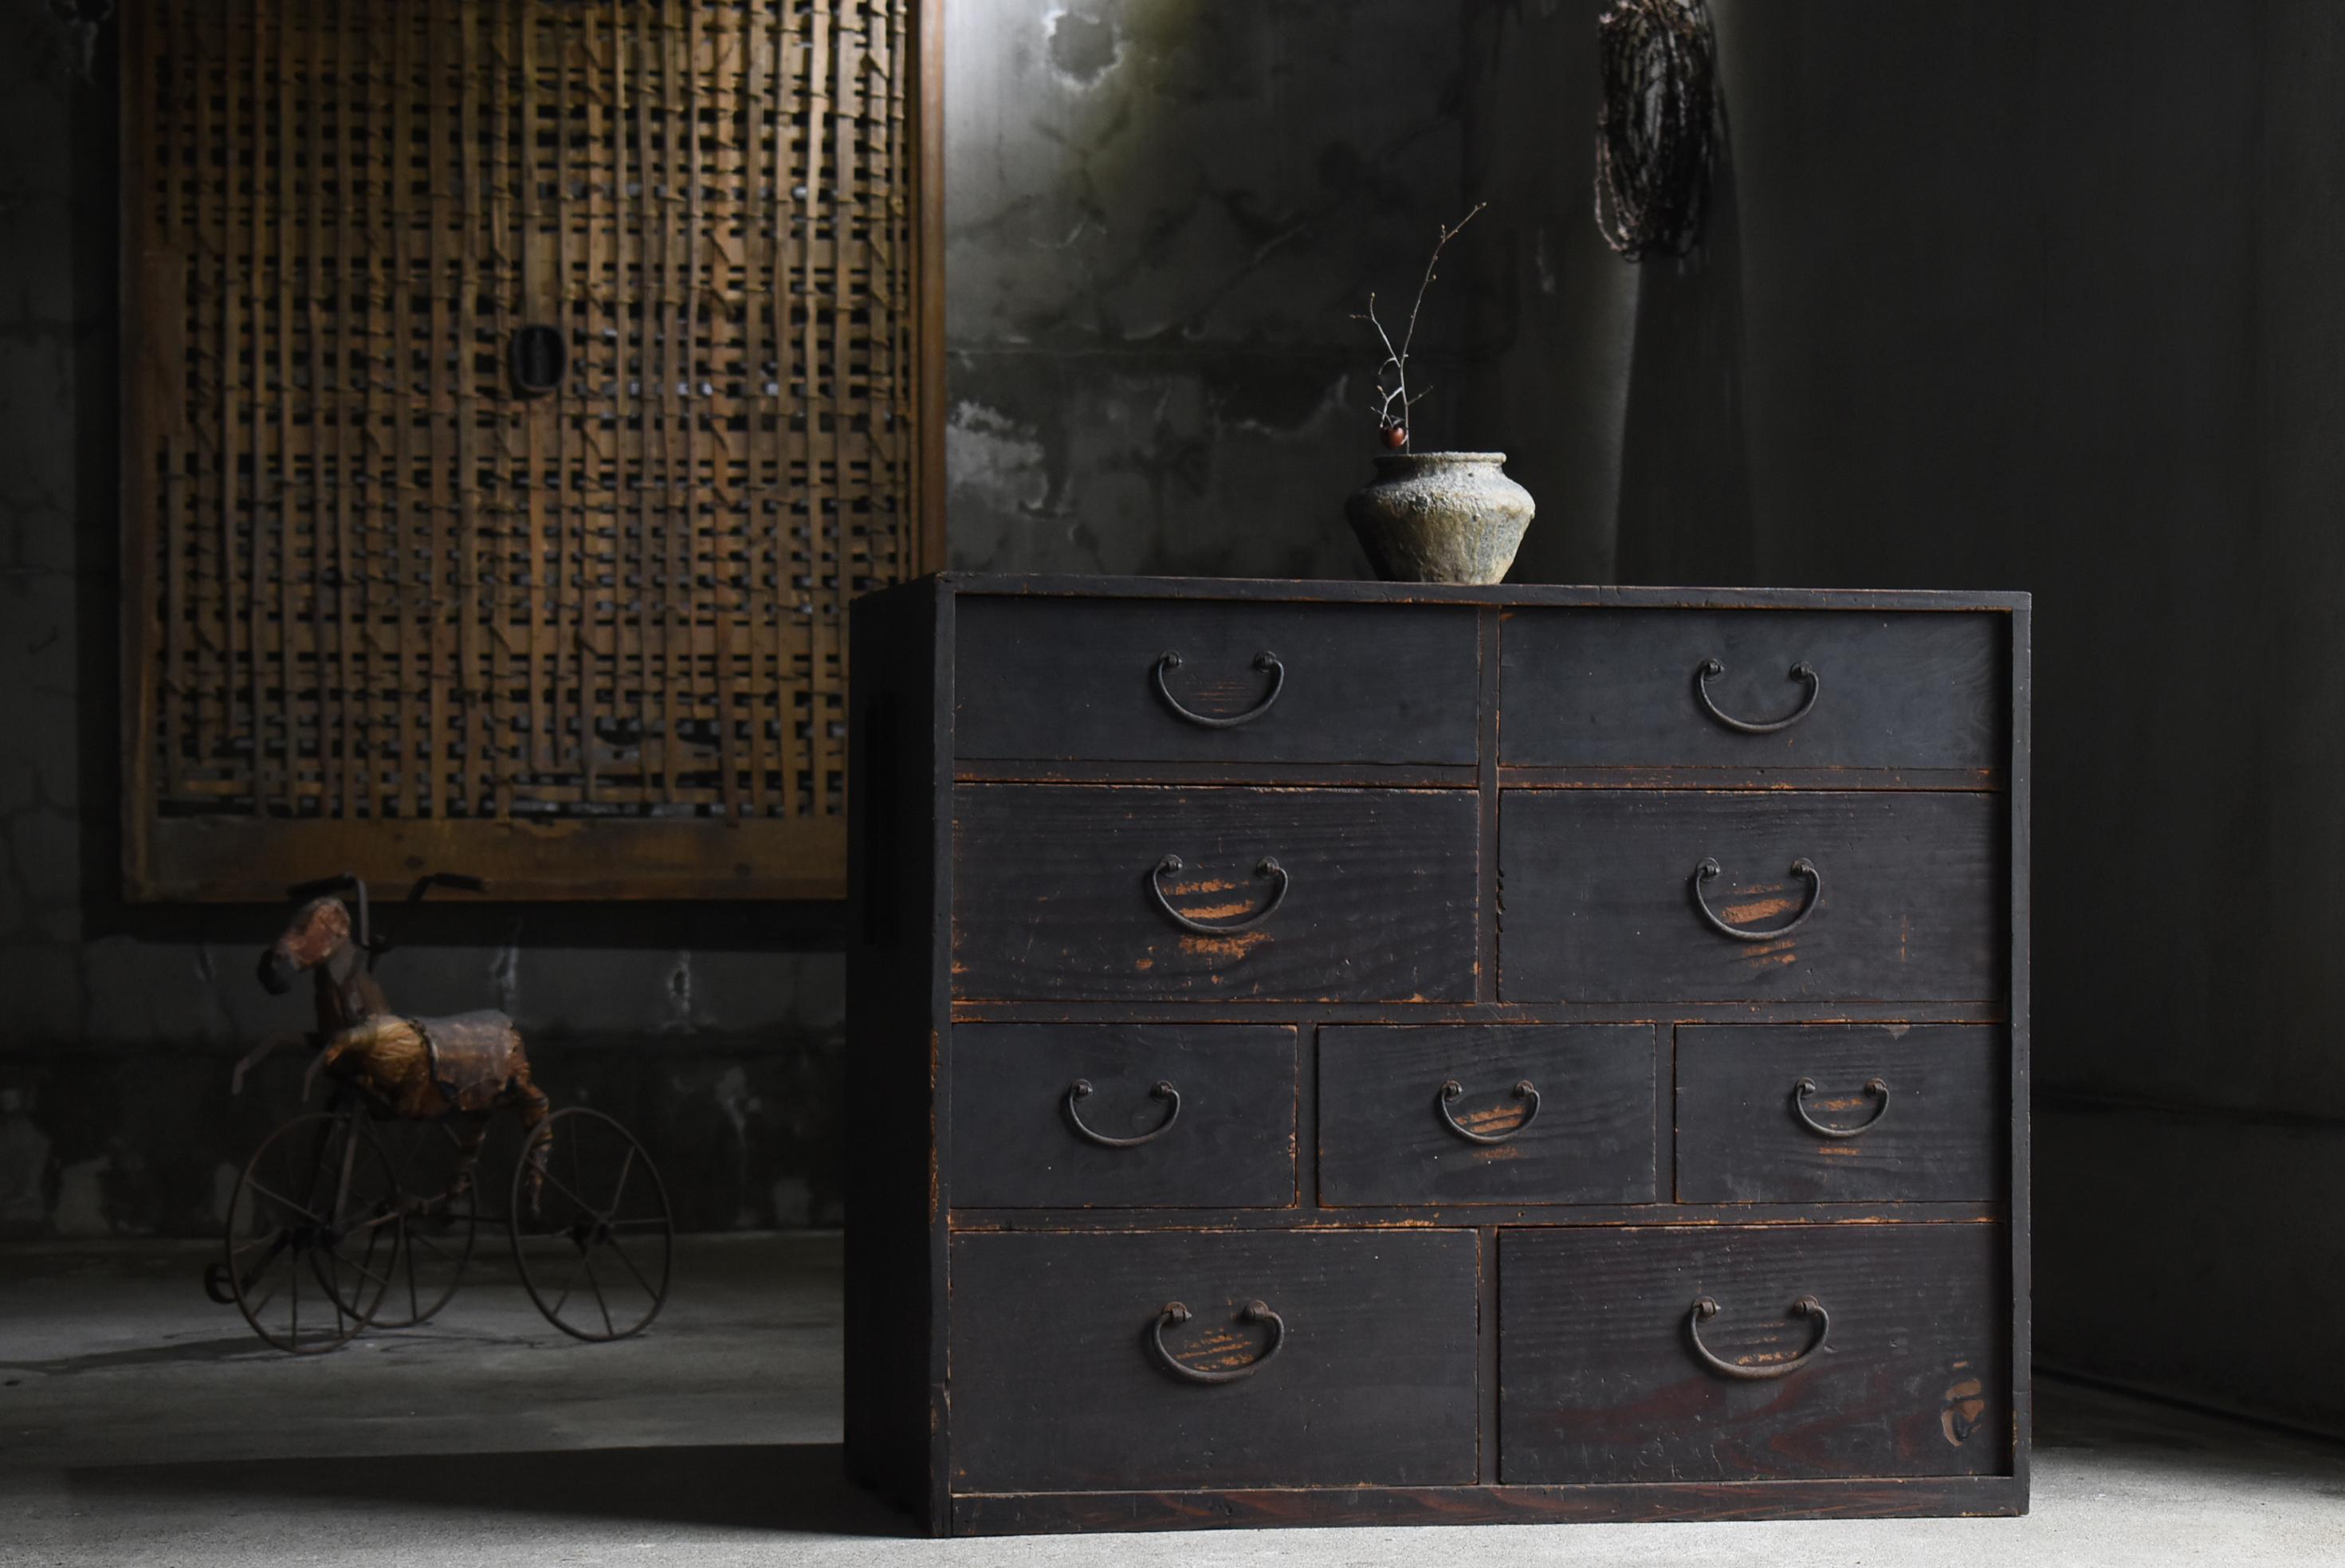 Very old large drawer storage made in Japan.
The furniture is from the Meiji period (1860s-1900s).
Material is cedar. The handles are made of iron.

The design is simple and lean.
It is a very beautiful piece of furniture with a uniquely Japanese